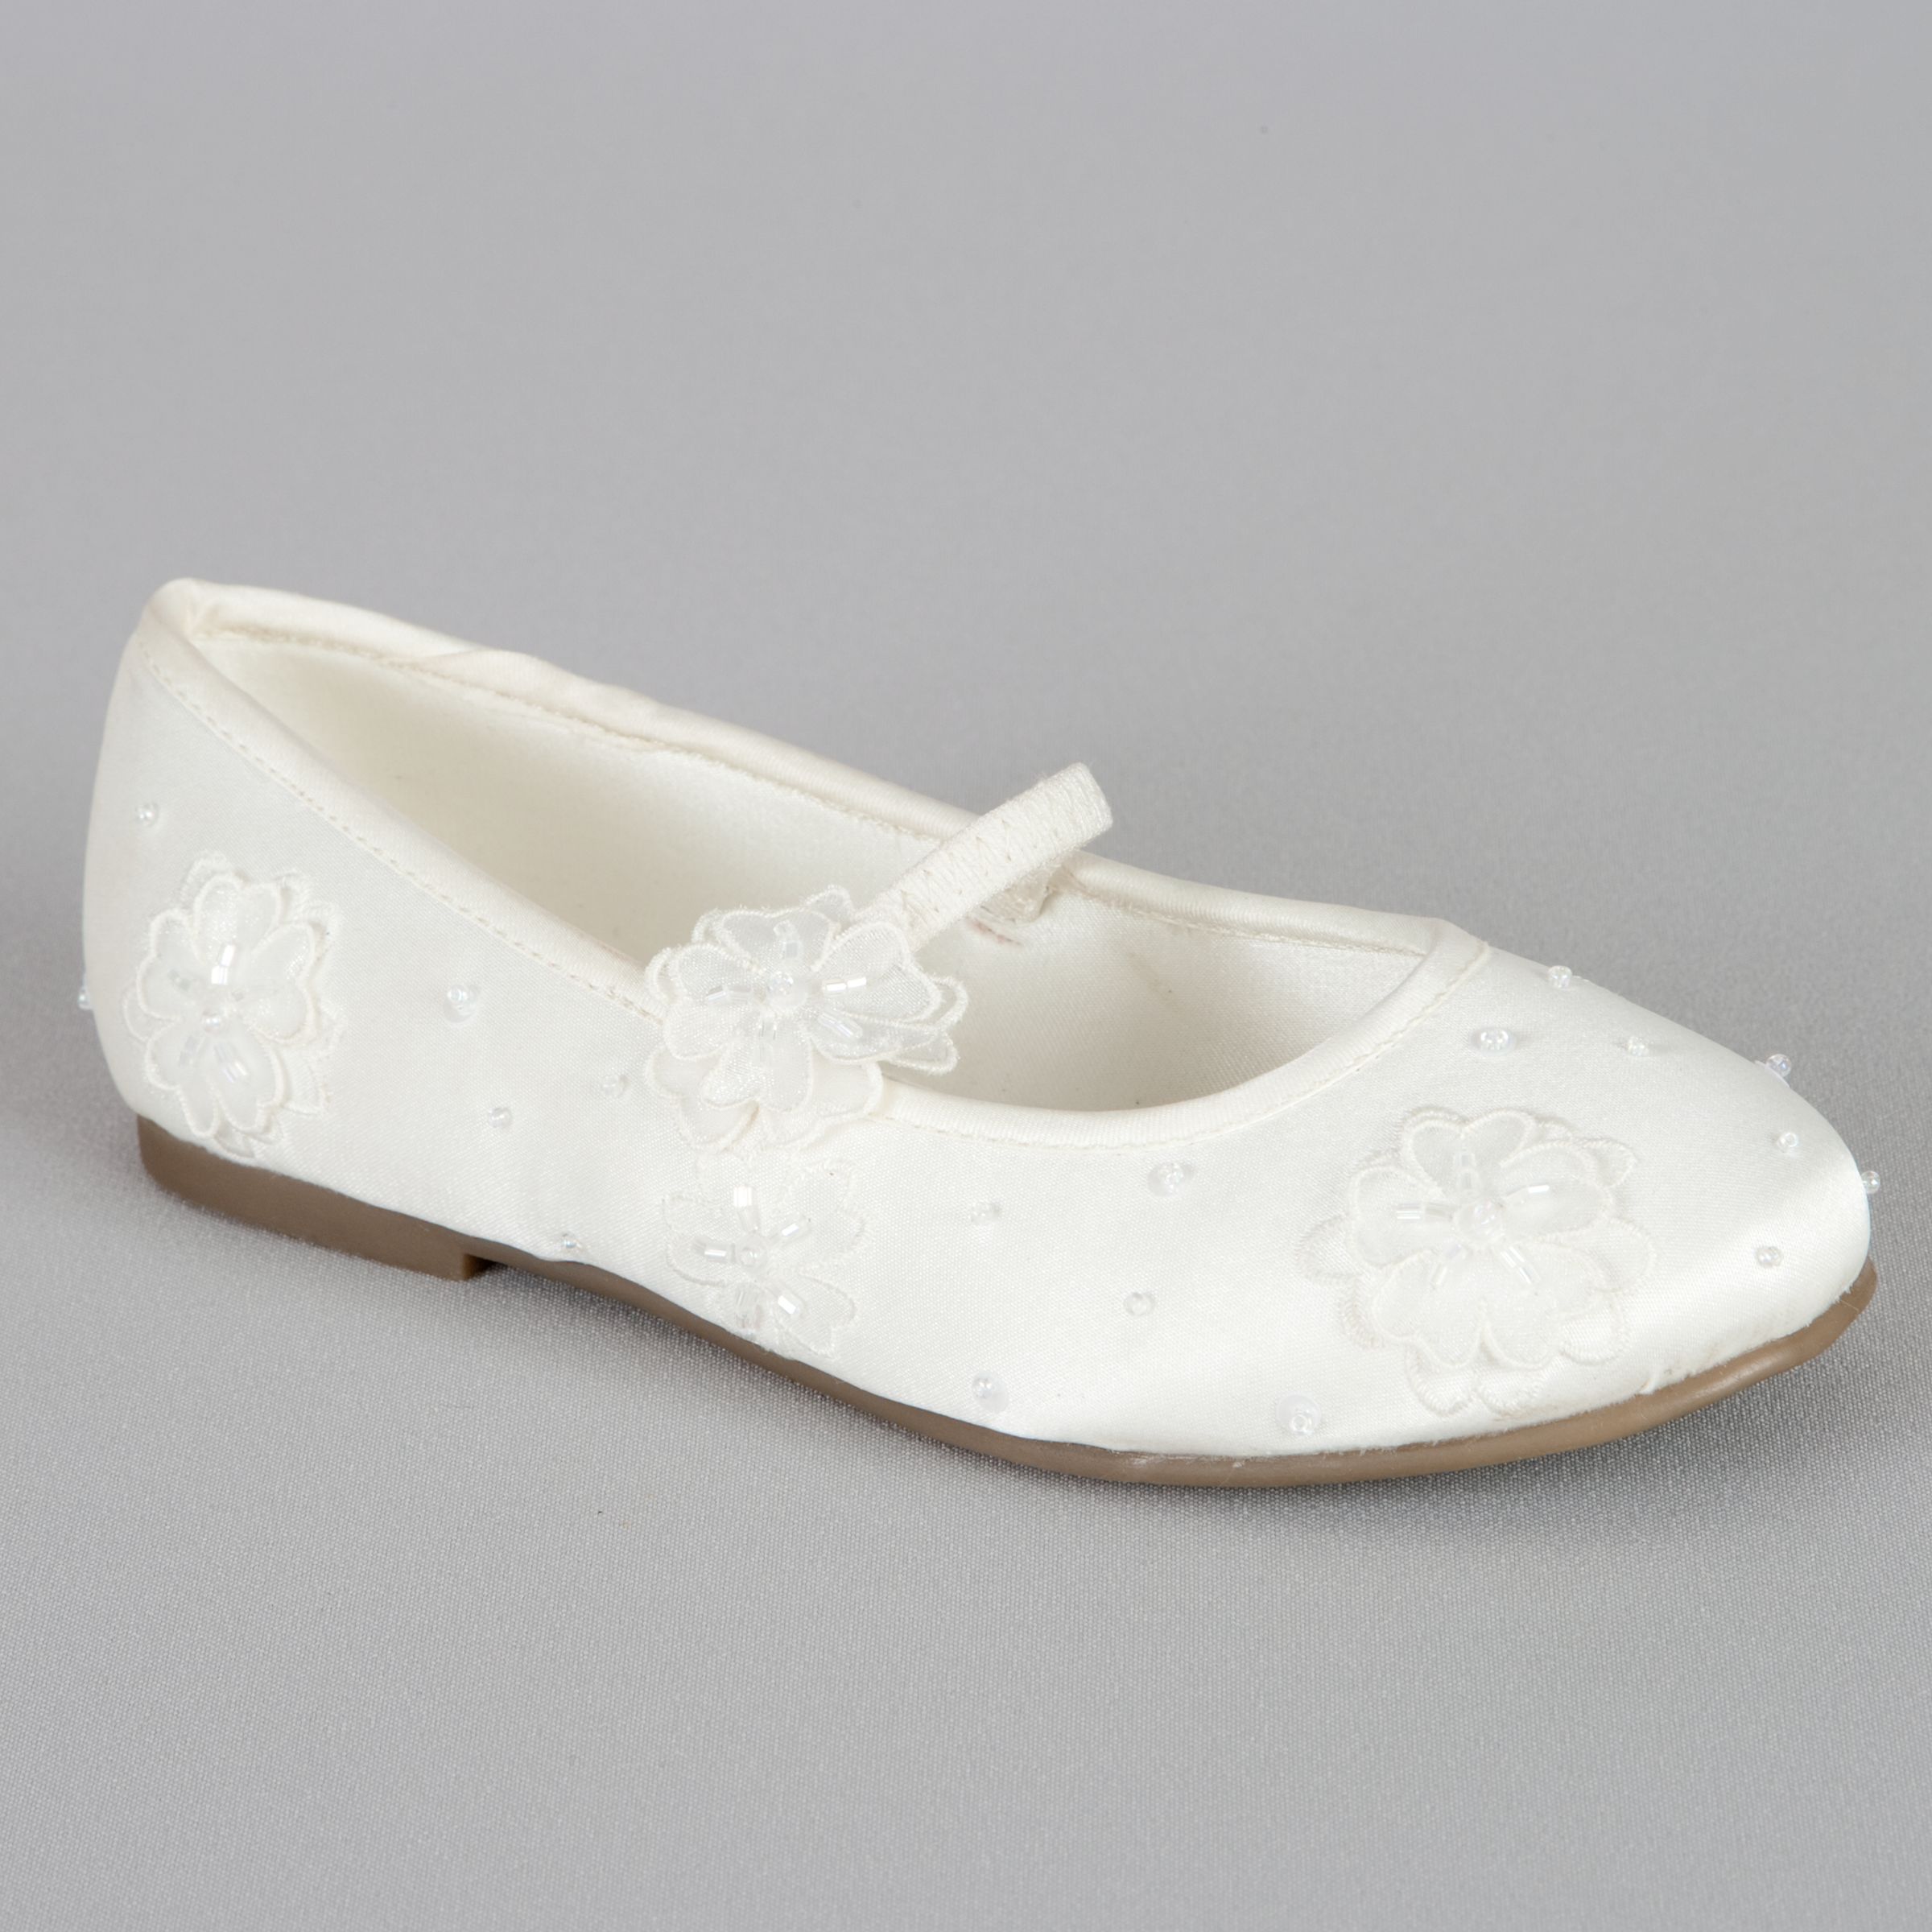 Flowergirl Shoes on Flower Bridesmaid Shoes  Ivory Online At Johnlewis Com   John Lewis